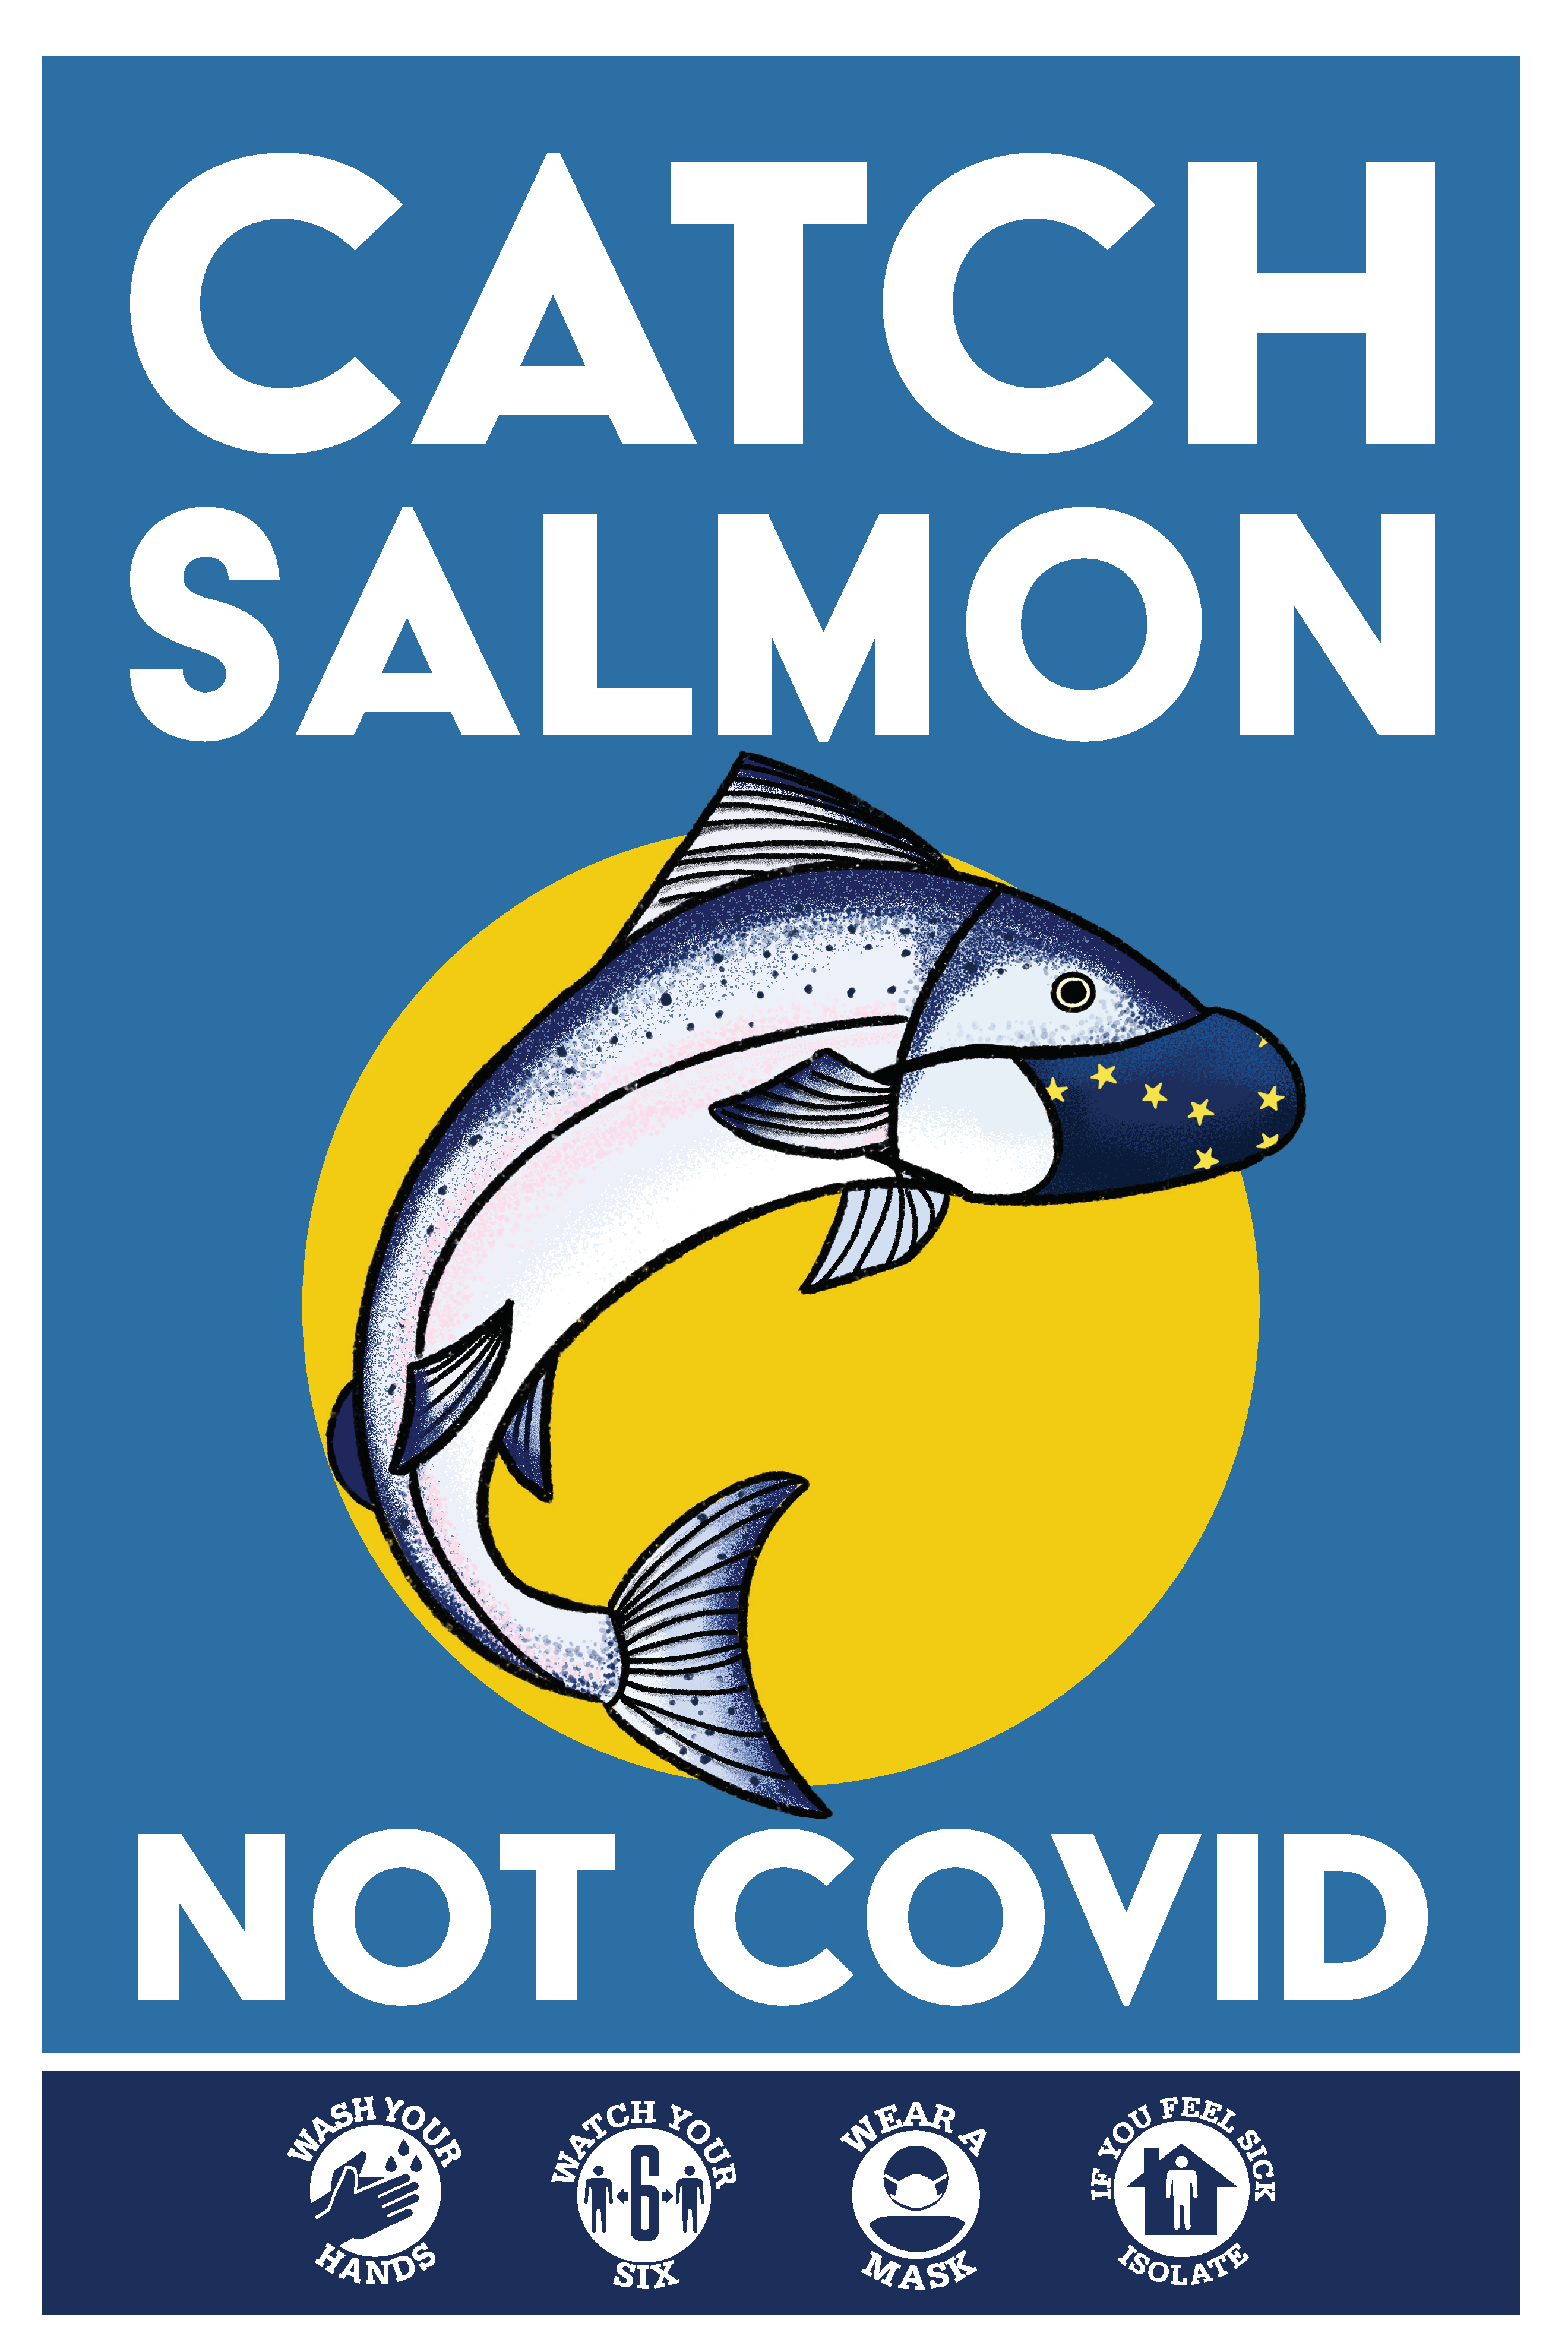 Catch salmon no COVID: wash your hands, watch your 6, wear a mask and isolate if you are sick